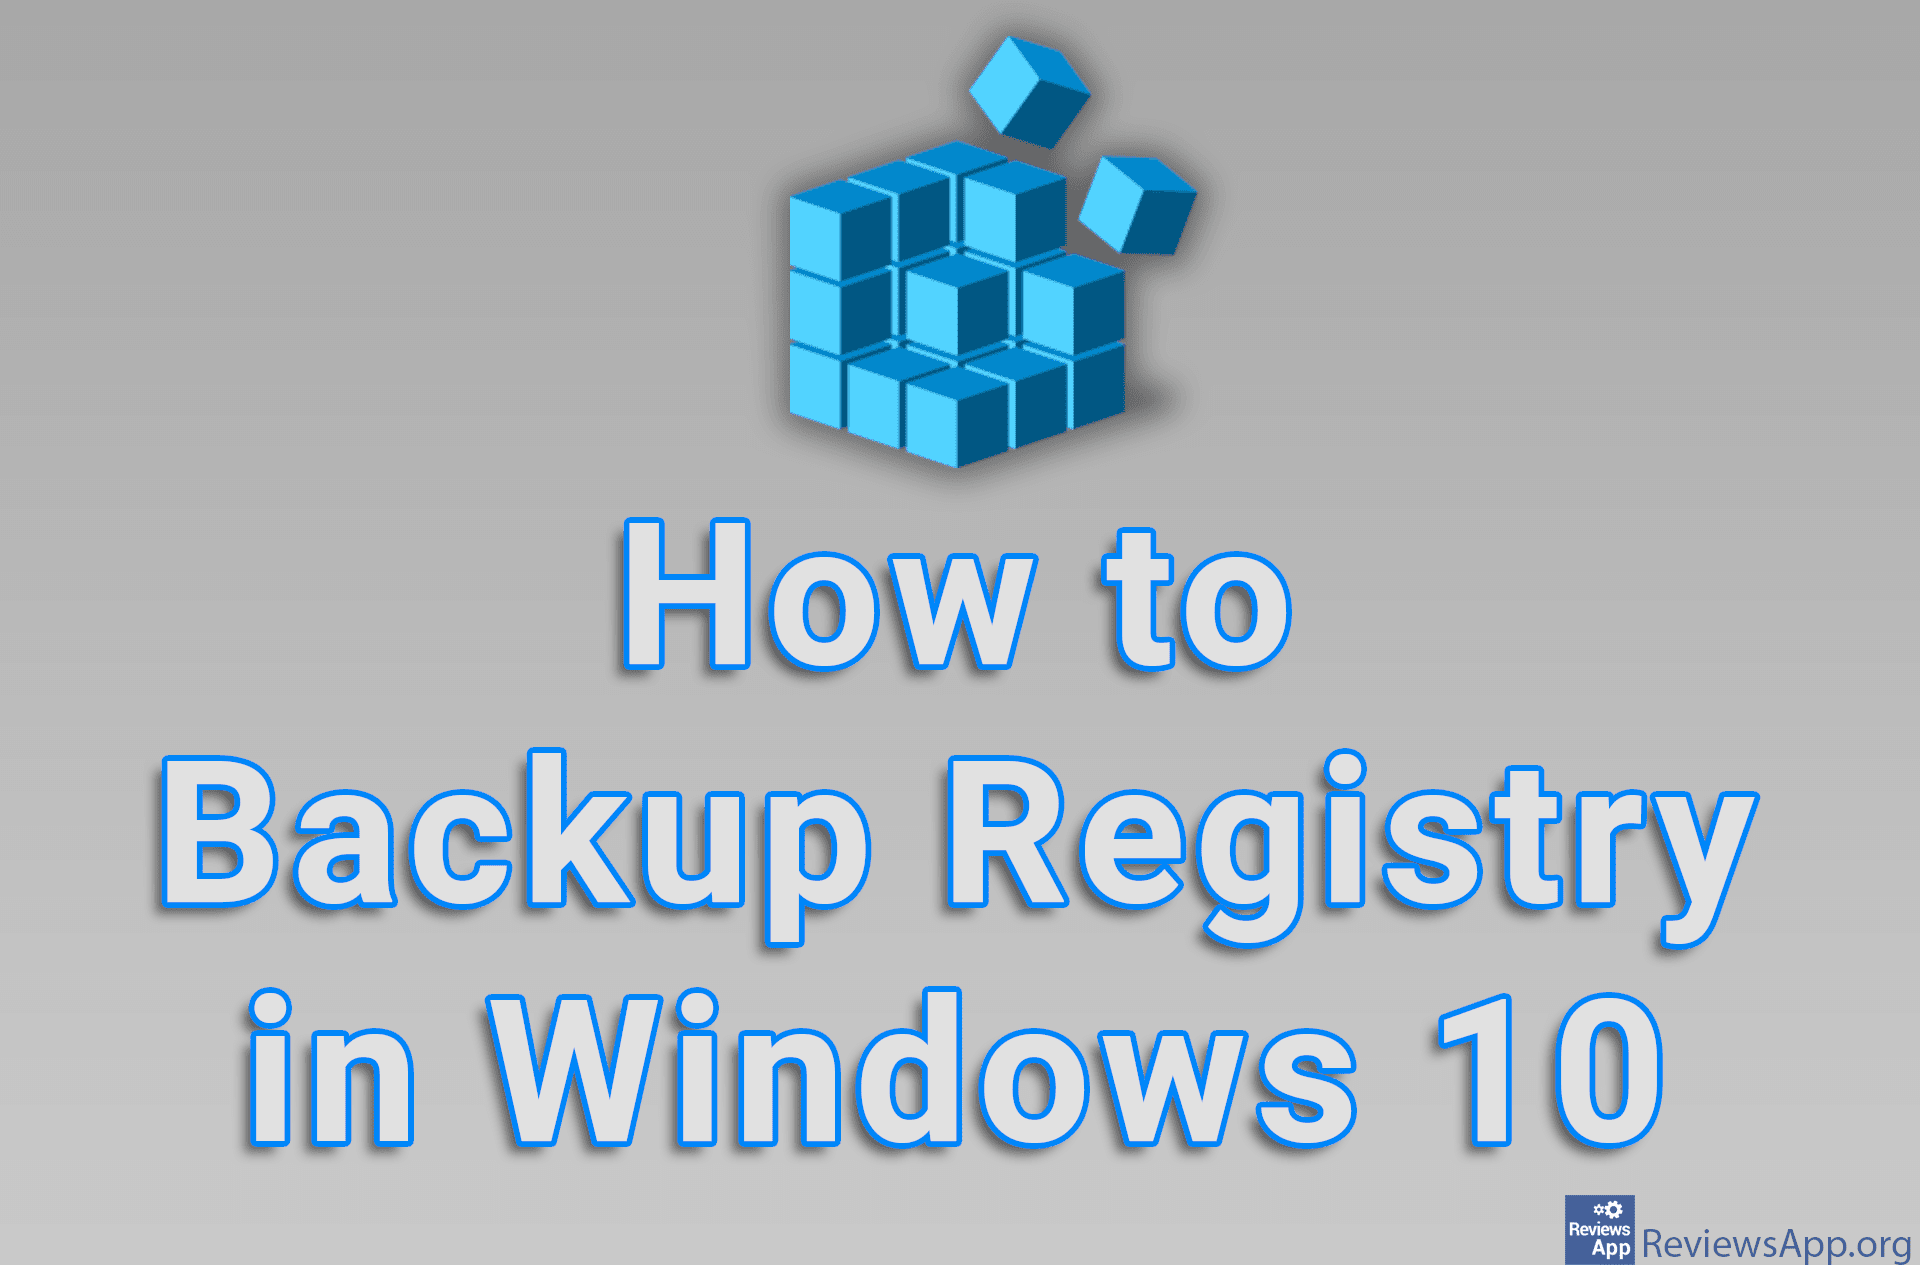 How to Backup Registry in Windows 10